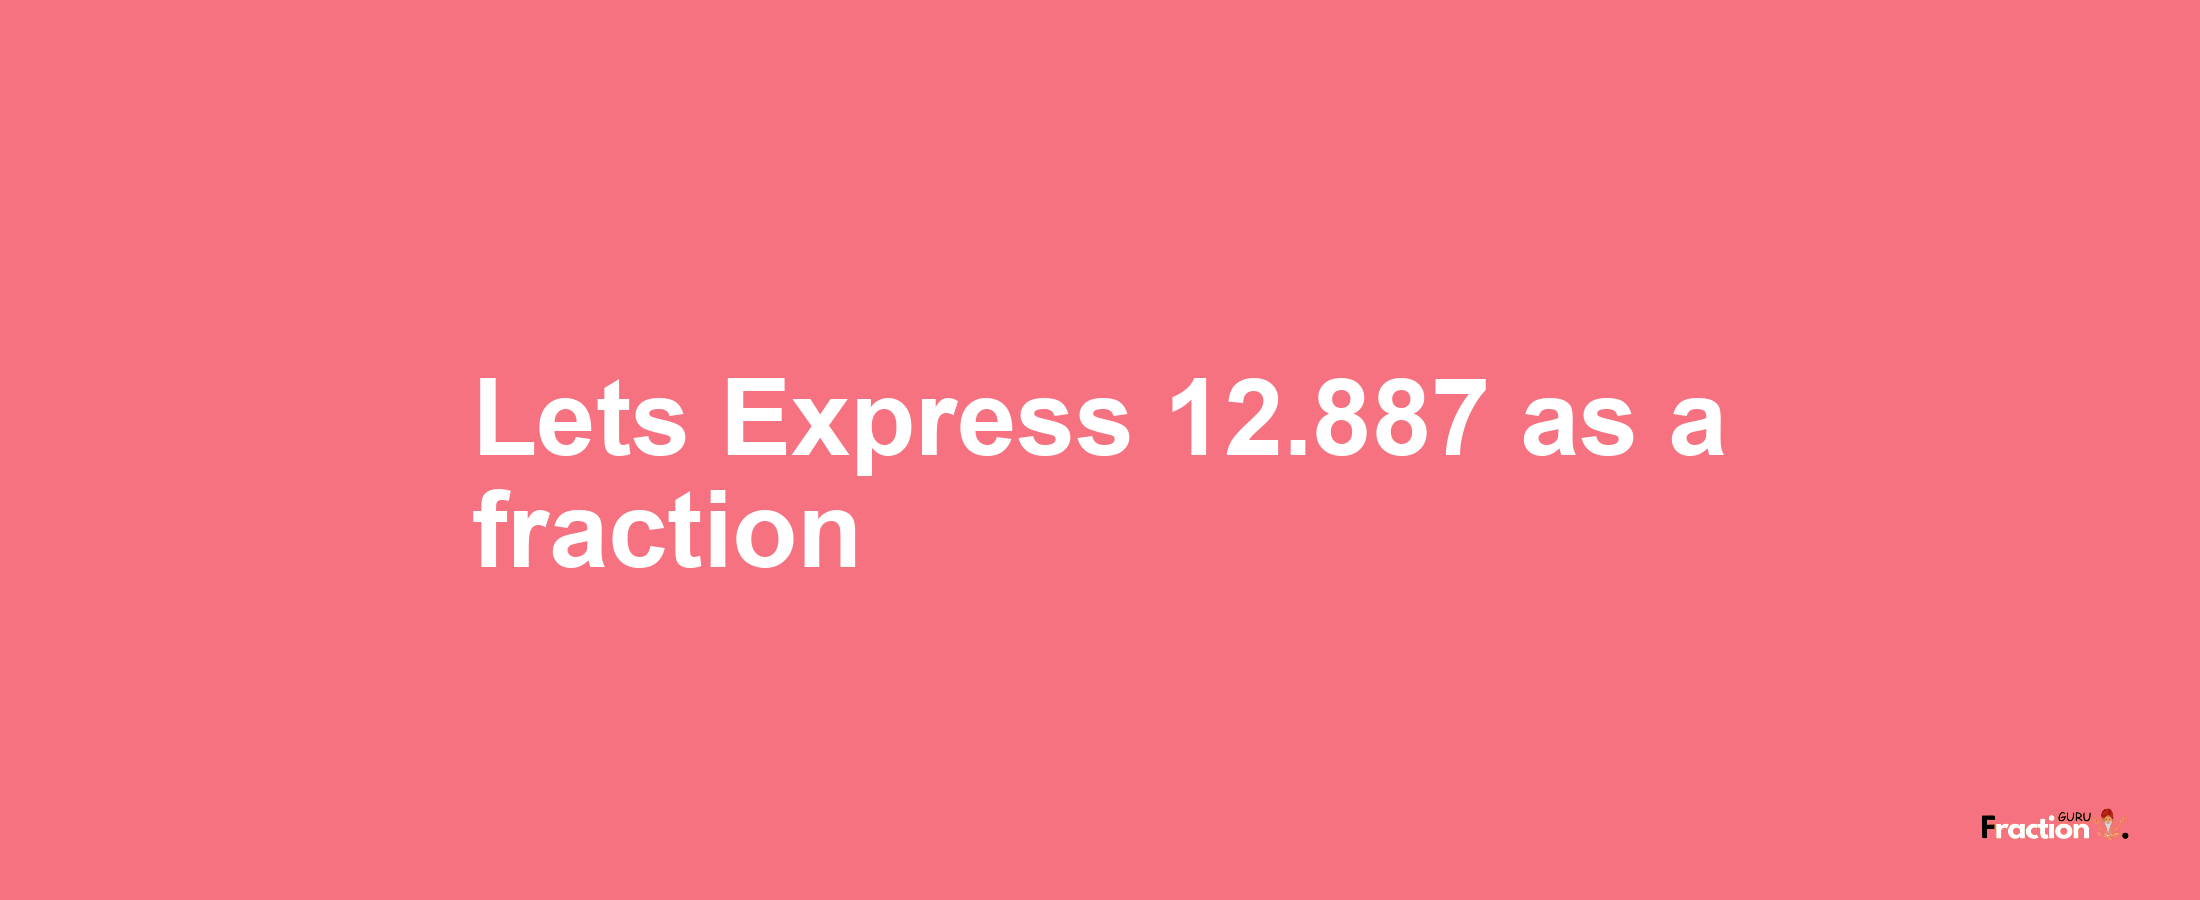 Lets Express 12.887 as afraction